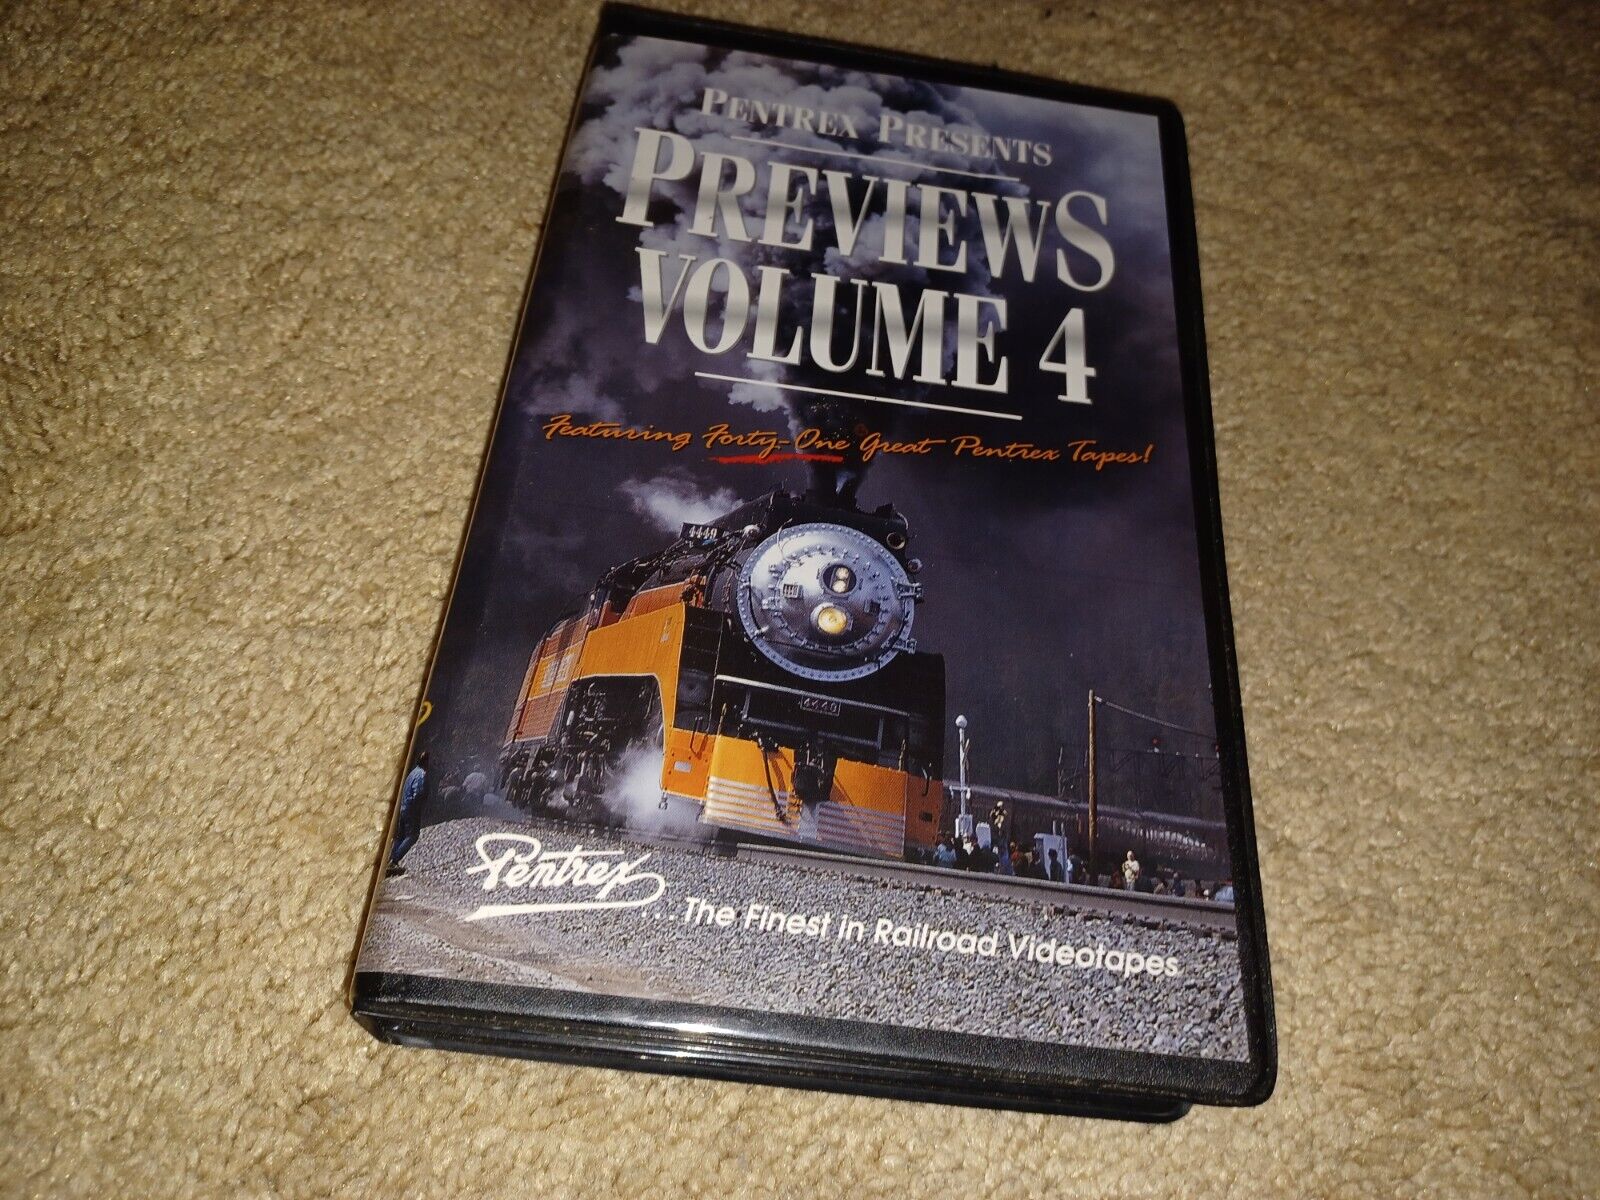 Pentrex Previews Volume 4 - VHS - 1995 Railroad Video - In Clamshell 